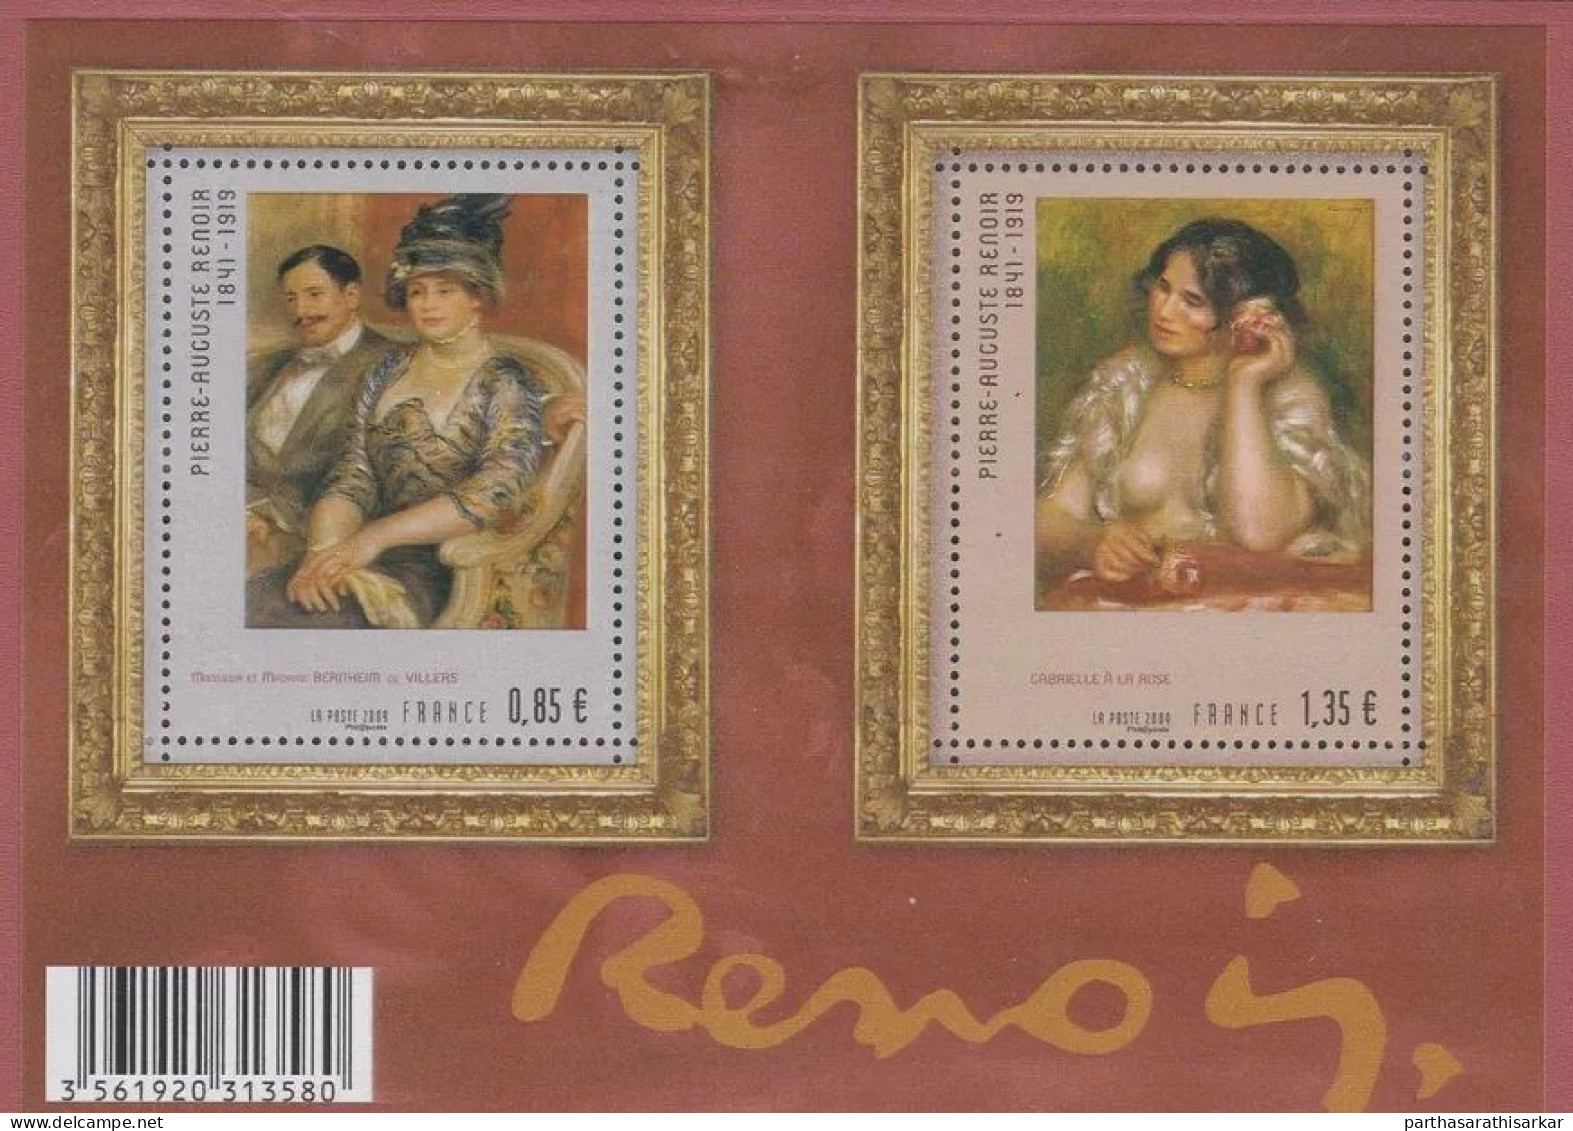 FRANCE 2009 THE 90TH ANNIVERSARY OF THE DEATH OF PIERRE-AUGUSTE RENOIR, 1841-1919 PAINTINGS MINIATURE SHEET MS MNH - Neufs